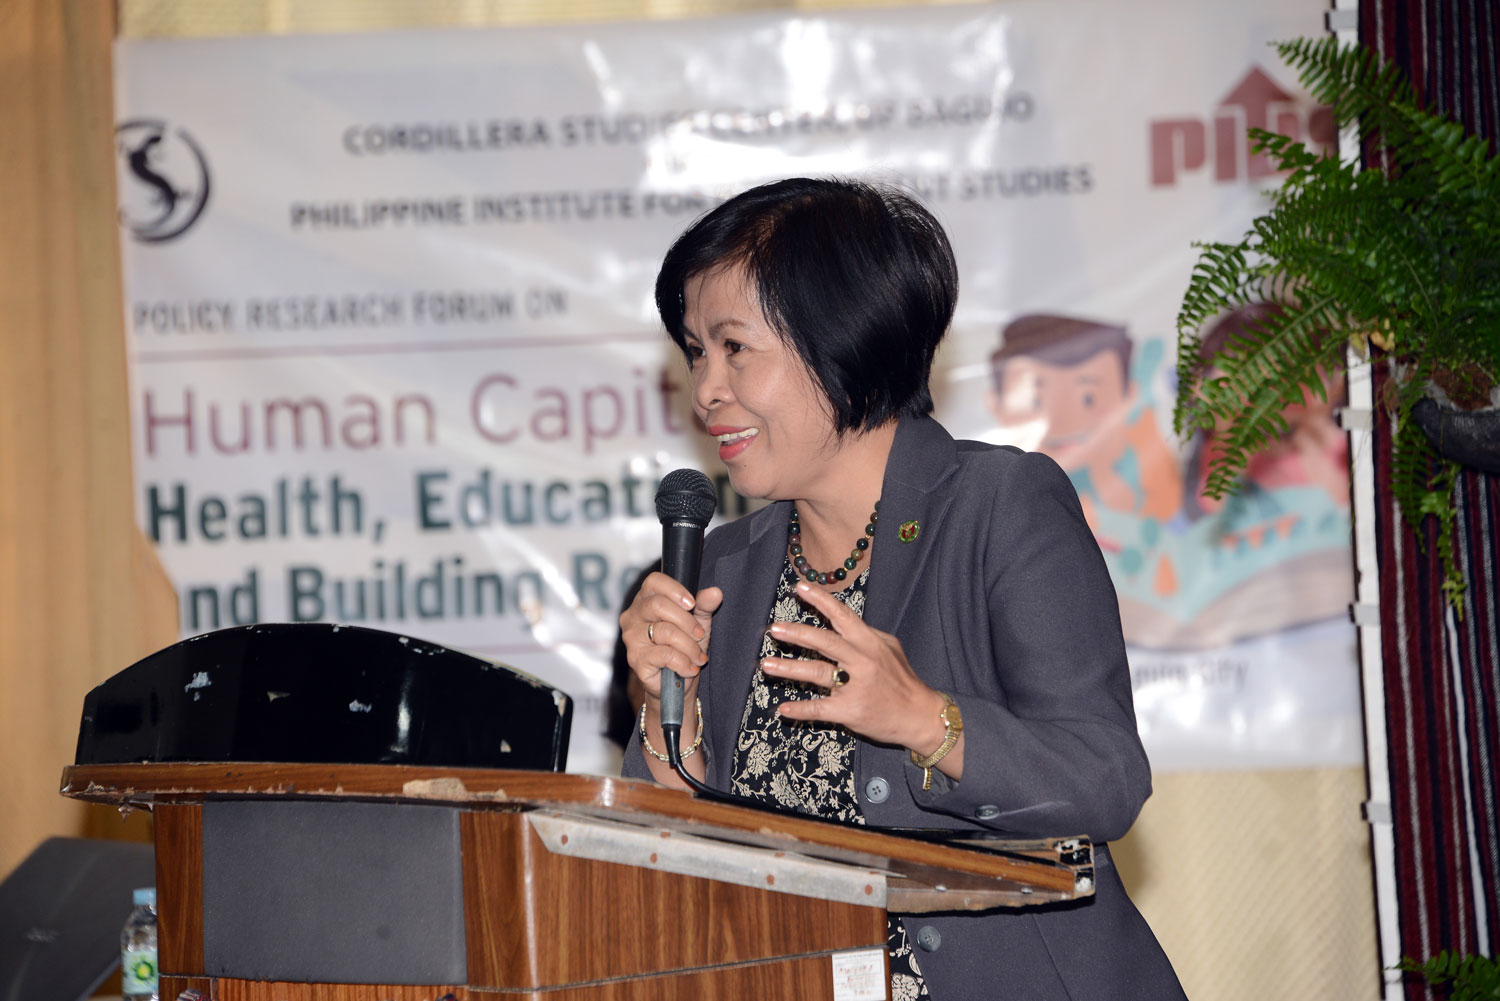 Policy Research Forum on Human Capital: Health, Education, and Building Resilience-DSC_6091.jpg